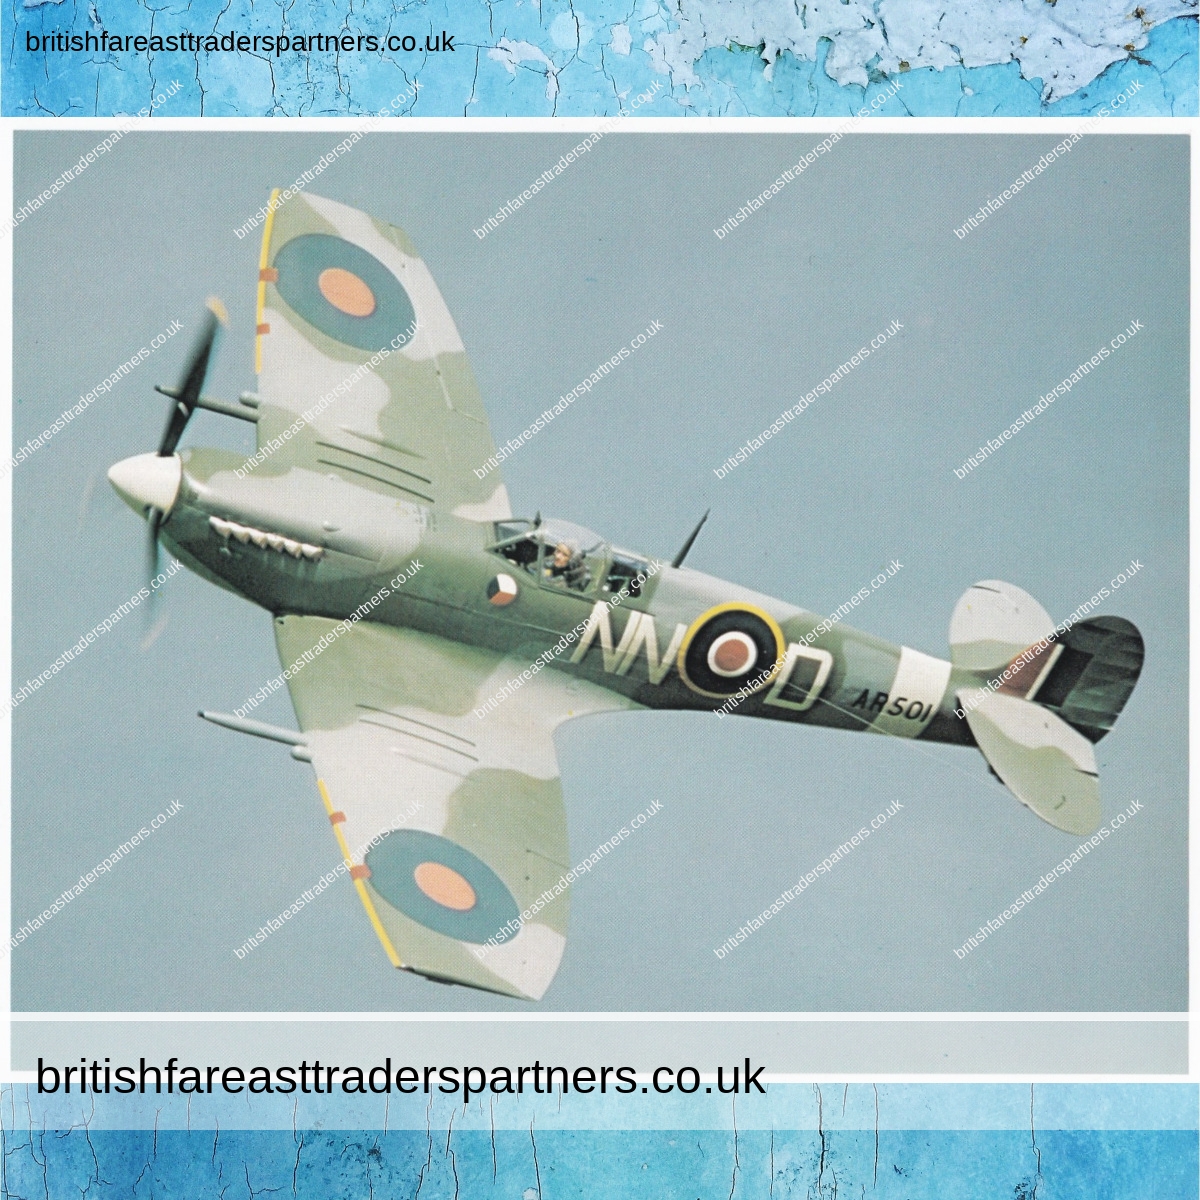 SUPERMARINE SPITFIRE WORLD WAR 2 BRITISH FIGHTER AIRCRAFT VINTAGE | COLLECTABLES | HERITAGE |  AIRCRAFT | AERONAUTICA | BRITISH | UNITED KINGDOM | ALLIED FORCES ROYAL AIR FORCE | SUPERMARINE AVIATION WORKS | R.J. MITCHELL | VICKERS- ARMSTRONG | MILITARIA | TRANSPORT | AIRCRAFT | HISTORY